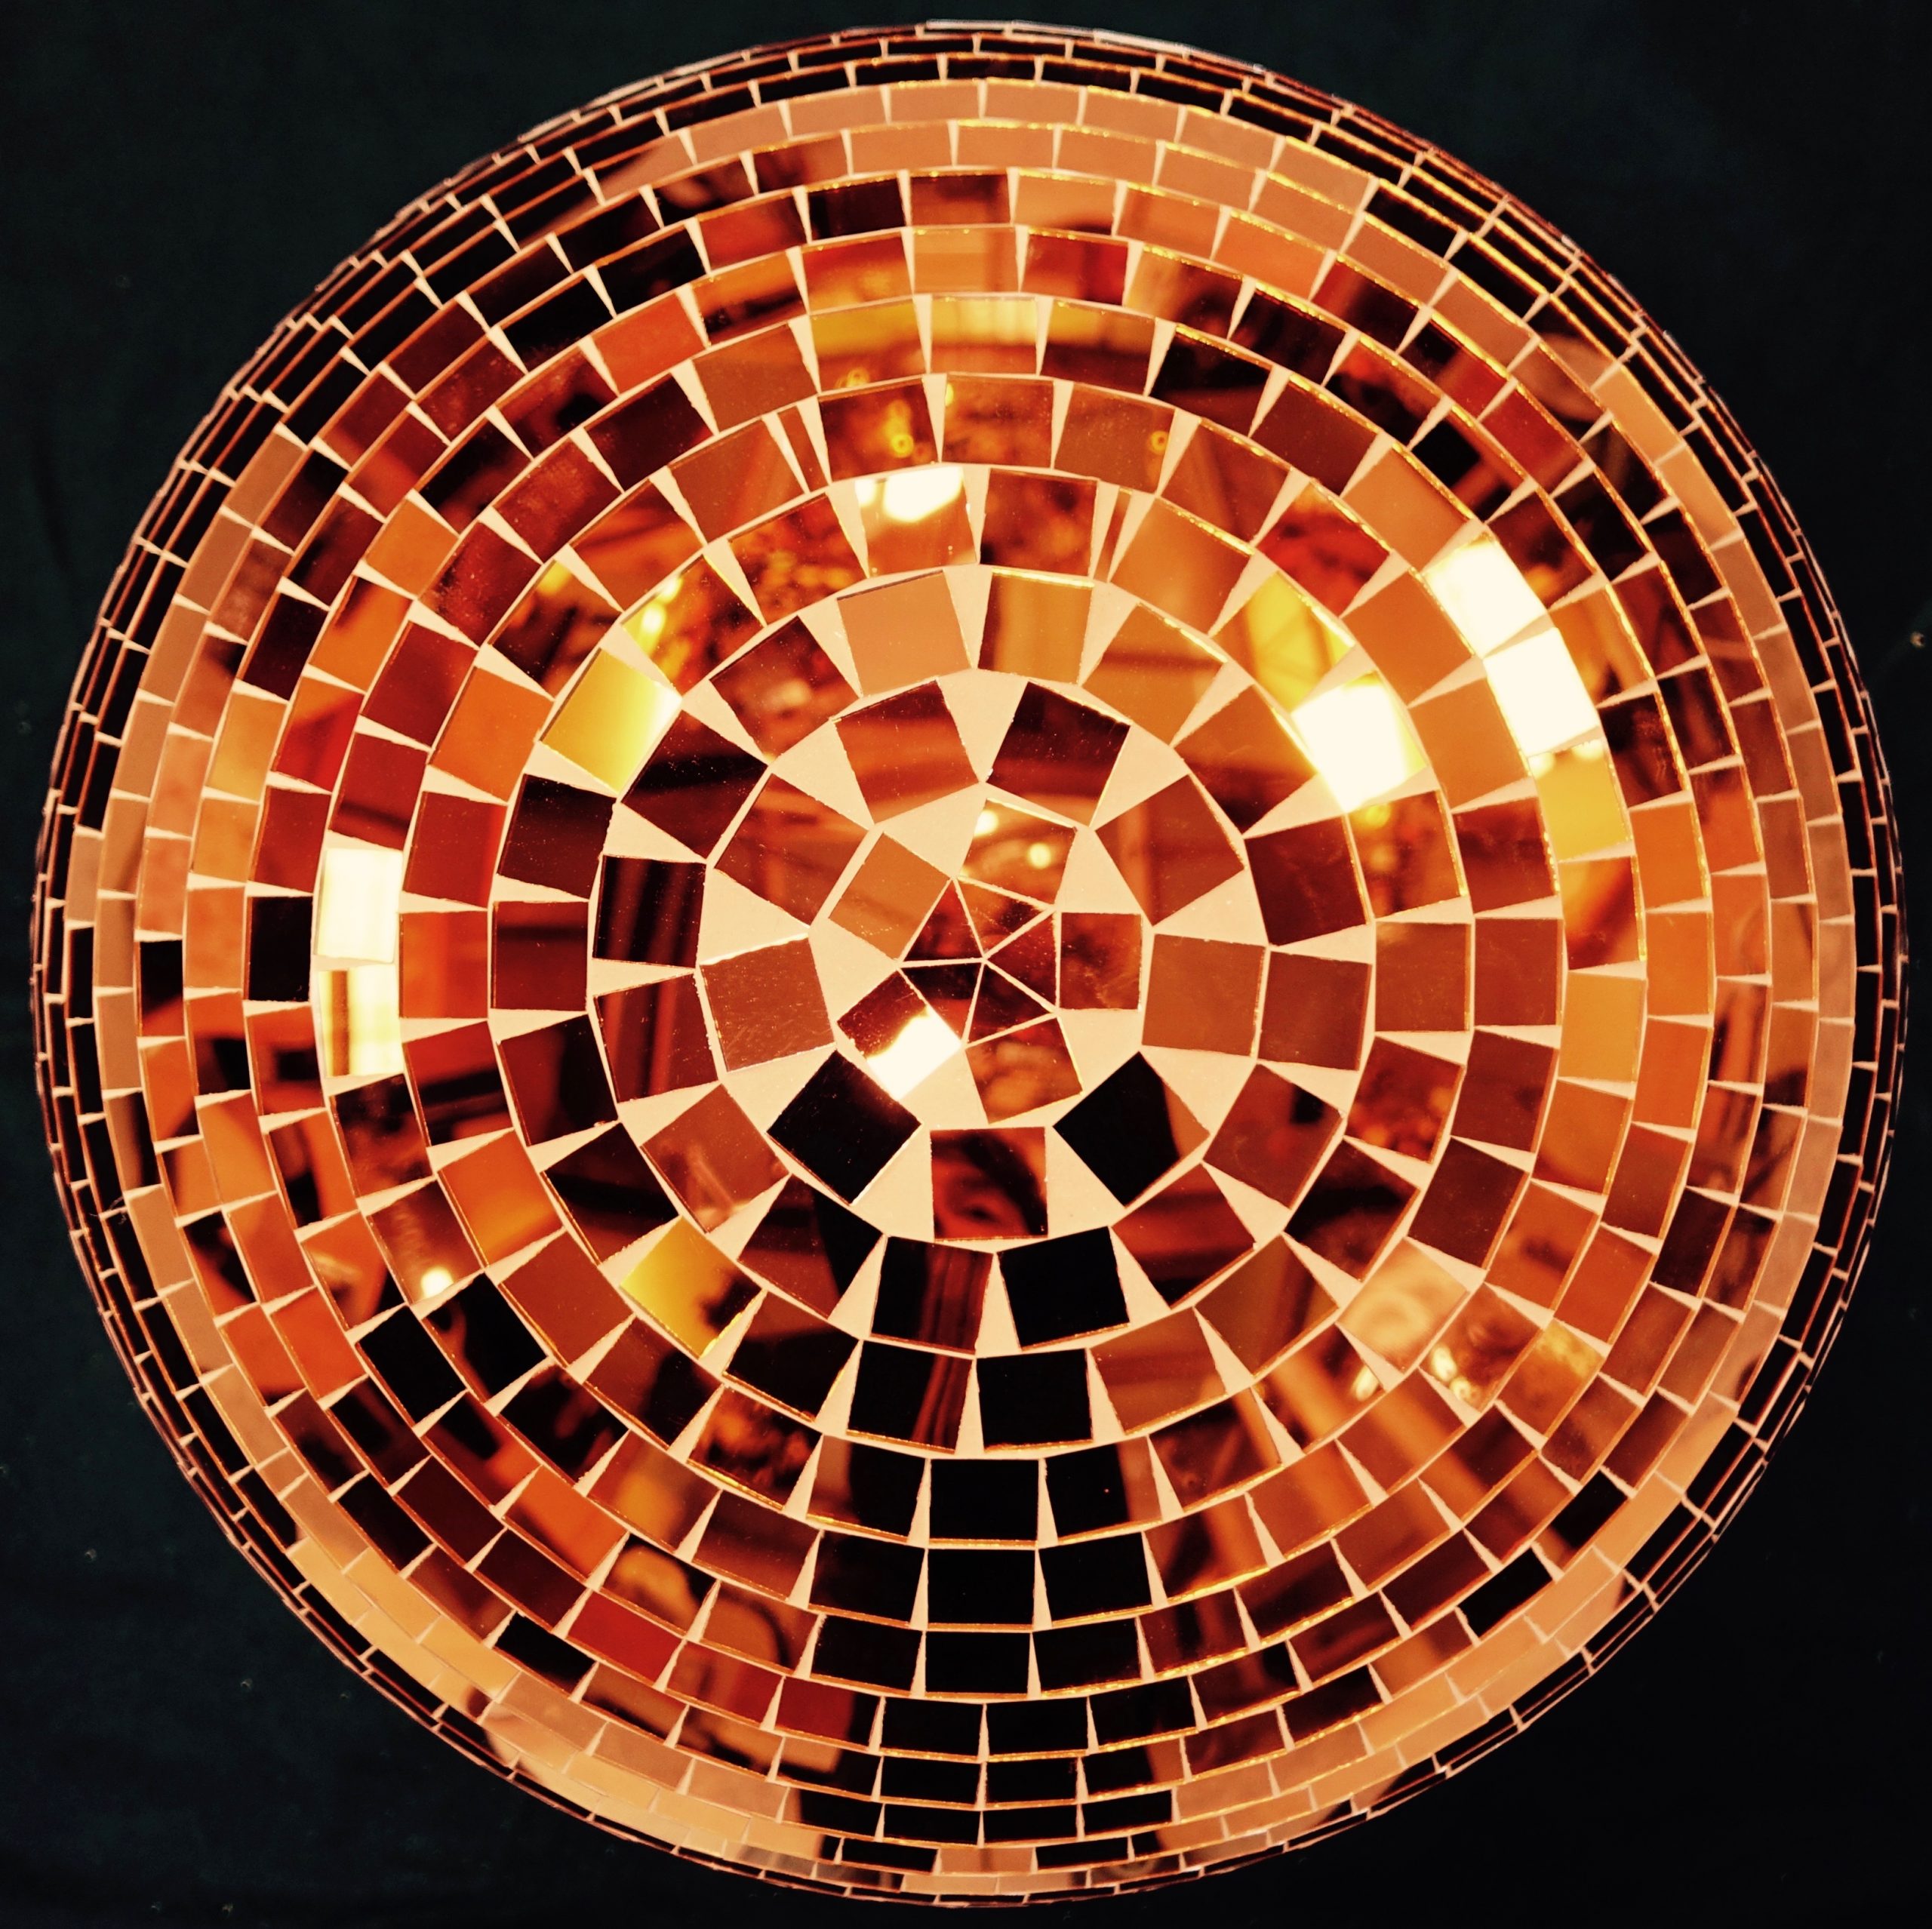 600mm blood orange mirror ball approx weight 10kg dry hire fee - £100 purchase fee - POA